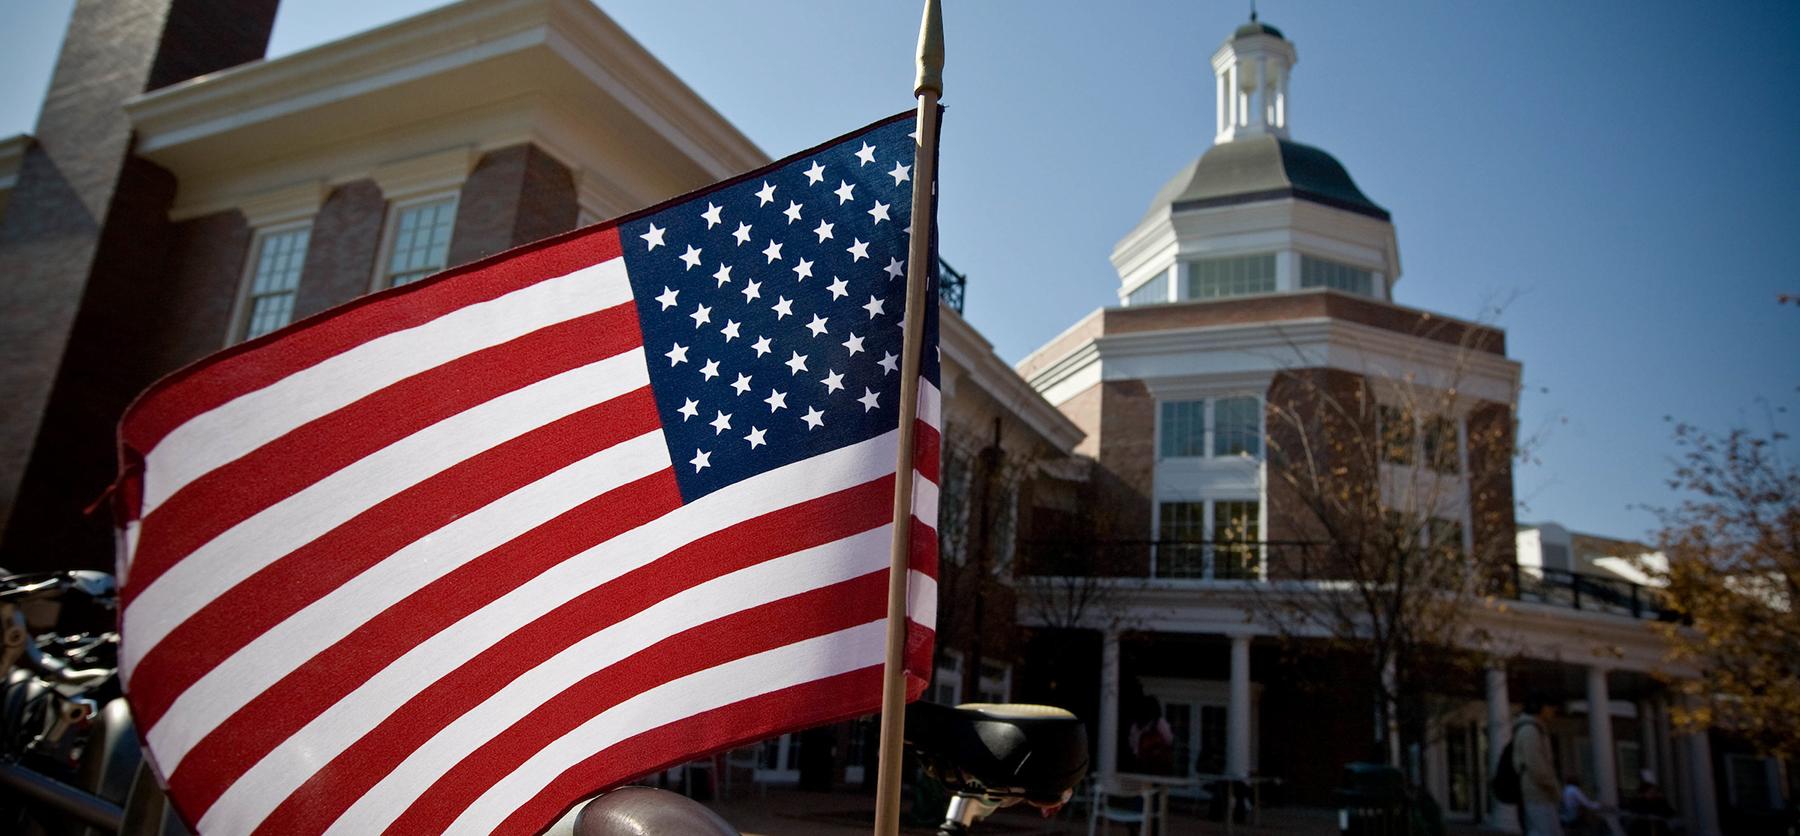 An American flag waves in the wind in front of the Ohio University Baker Center.